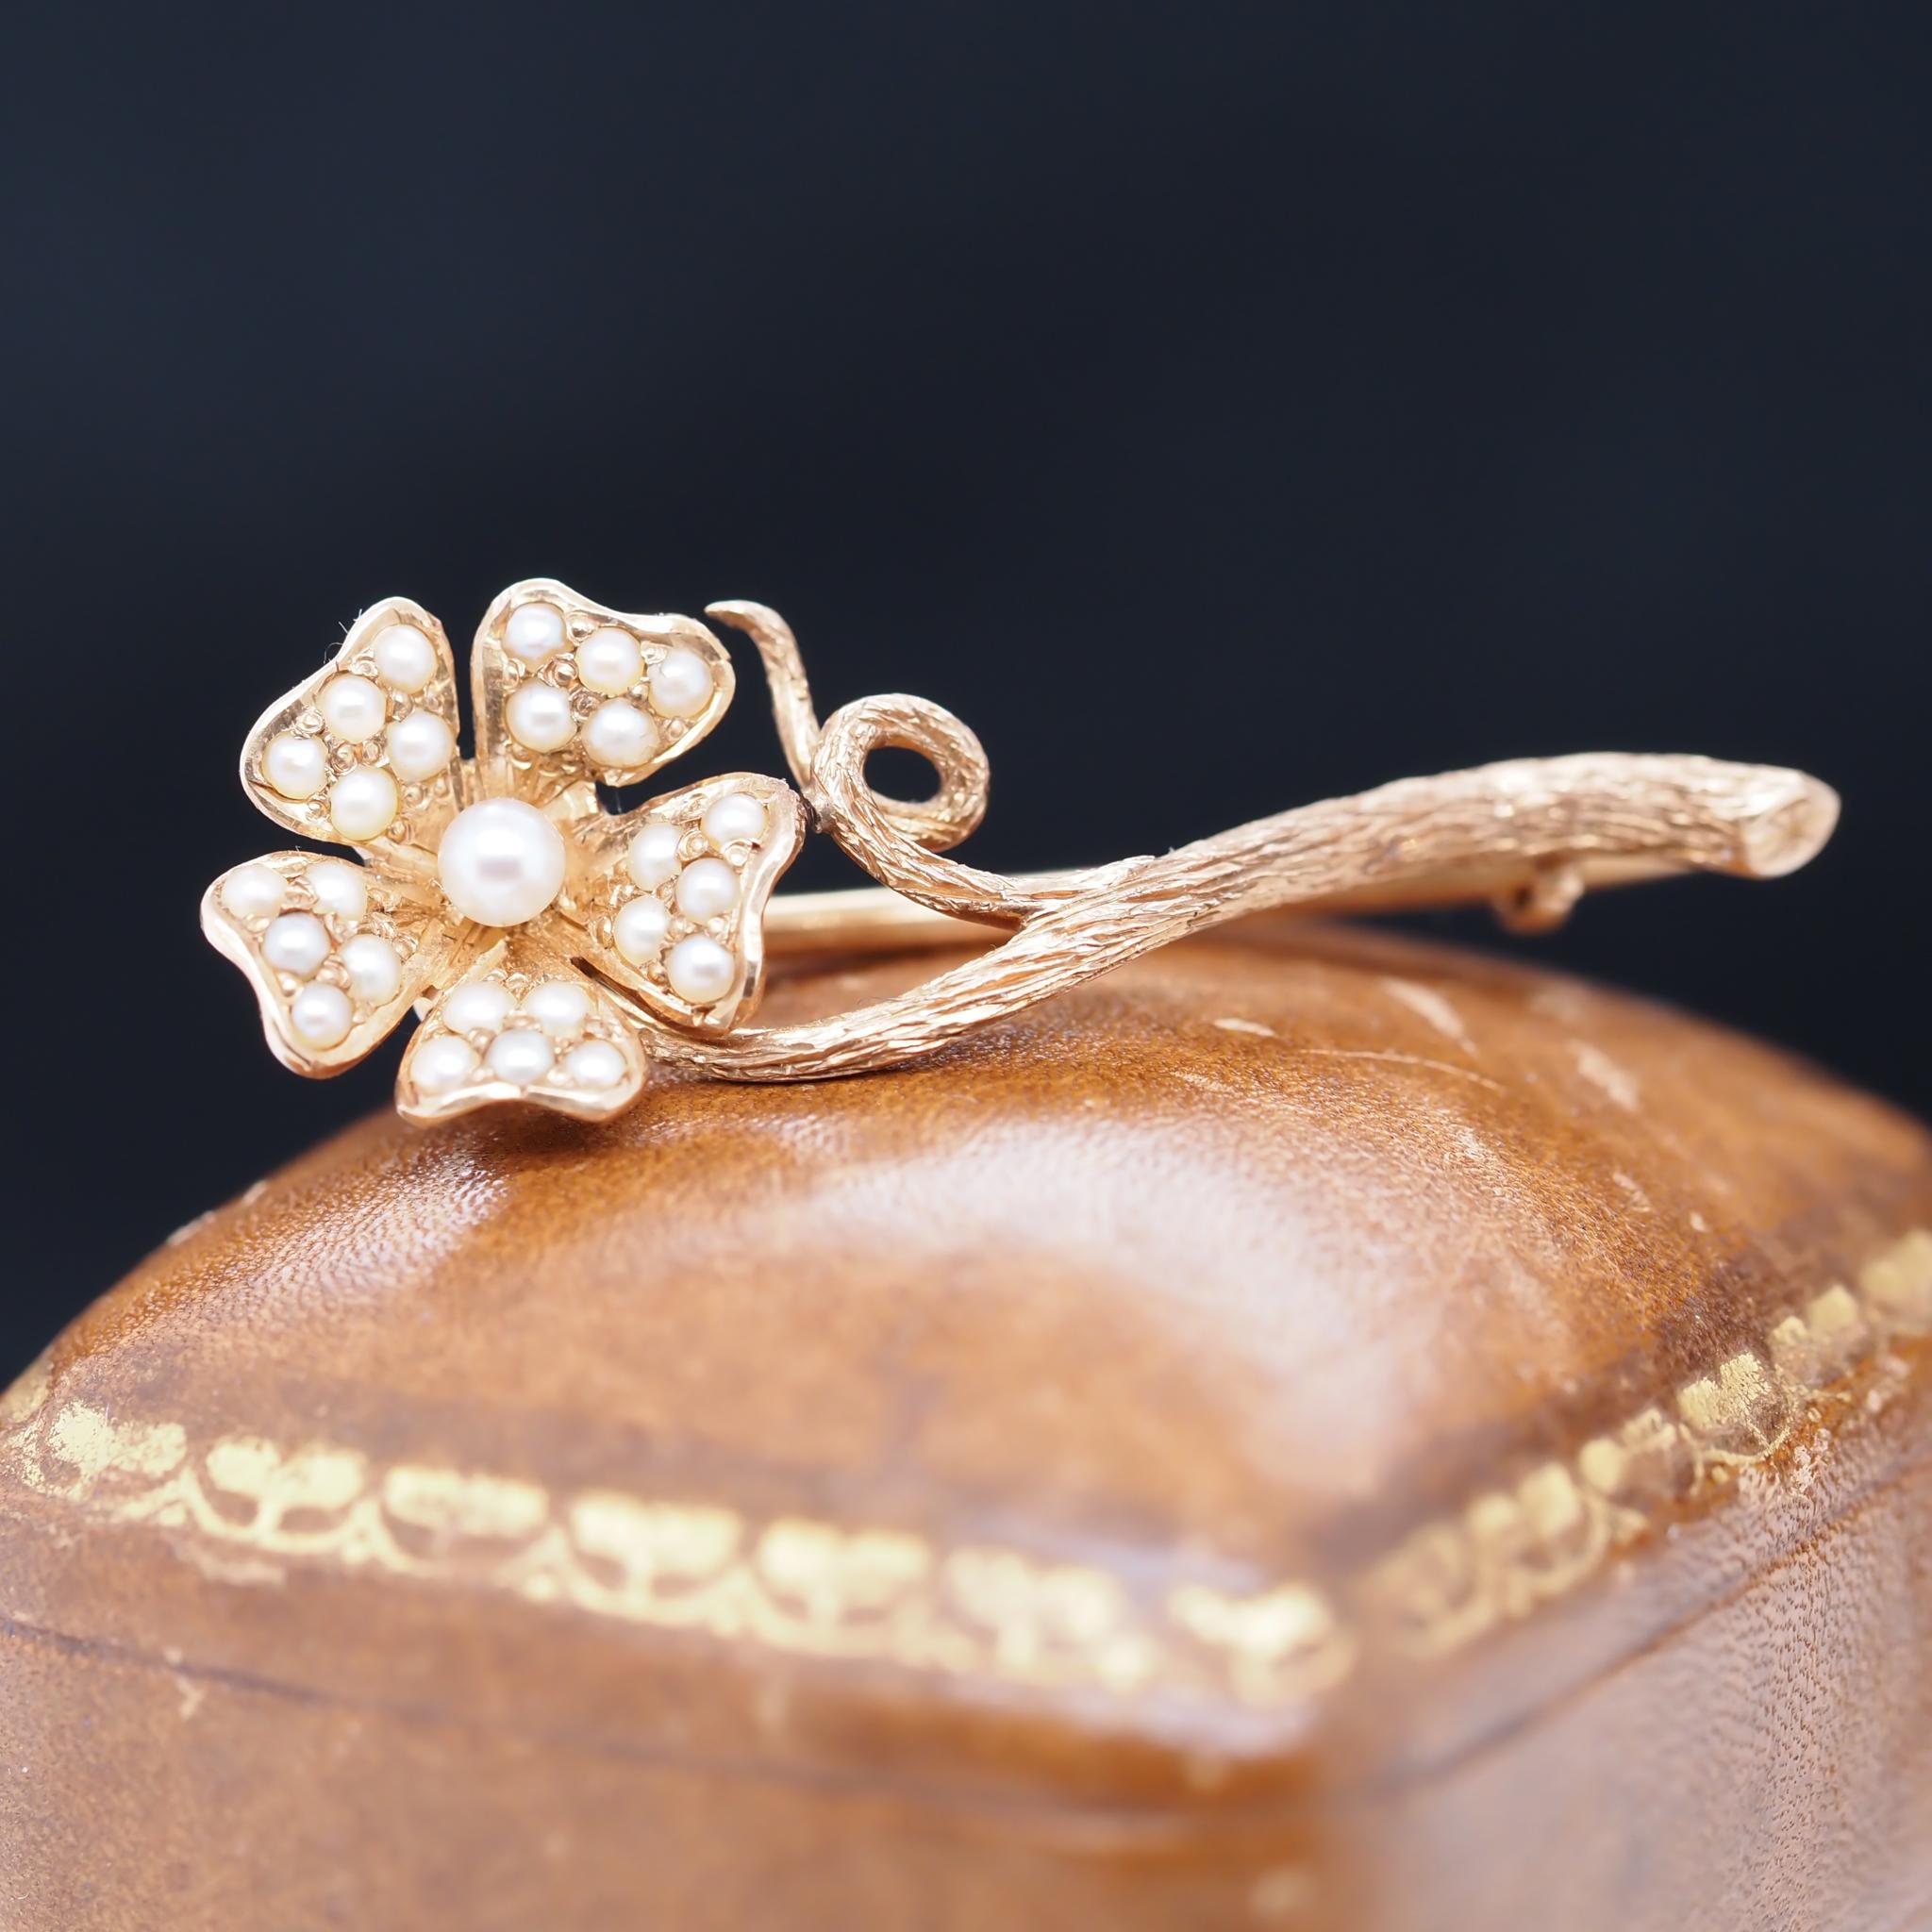 14 Karat Yellow Gold Victorian Flower Pin and Brooch with Pearls In Good Condition For Sale In Atlanta, GA